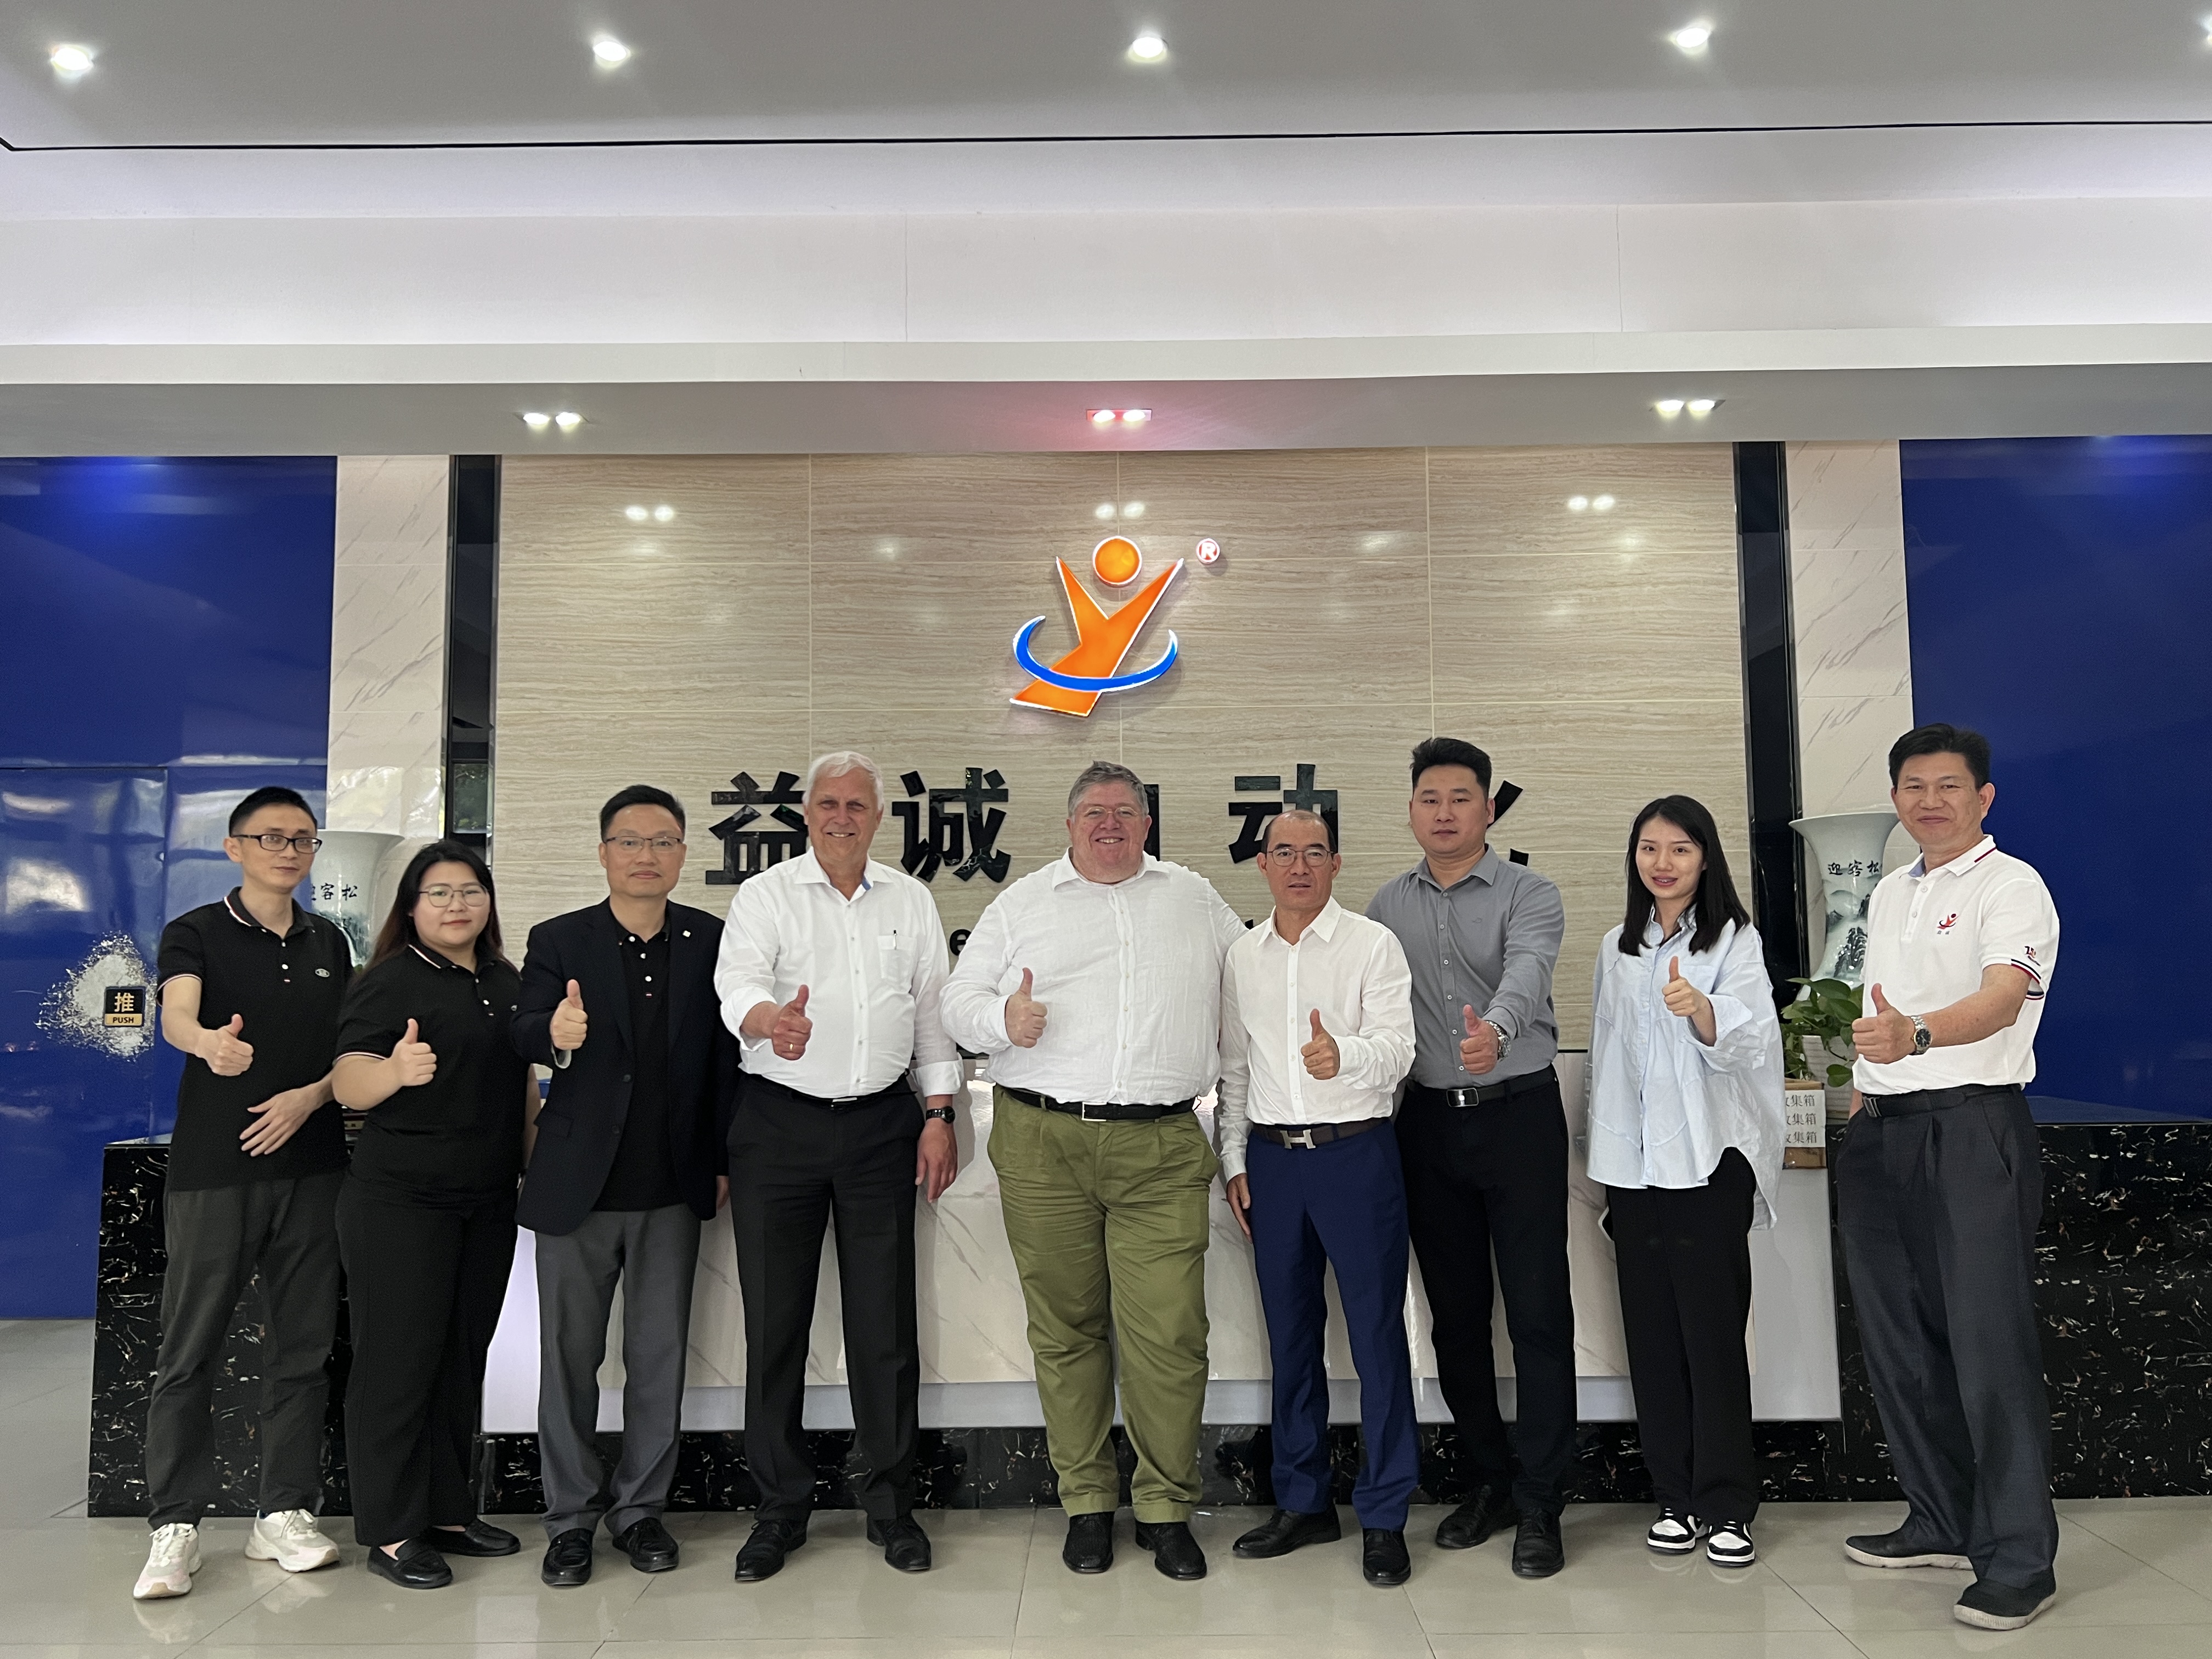 Warmly Welcome the Top Team of BJB Group, an Enterprise with More Than 150 Years of History, to Visit Our Company for an Exchange!